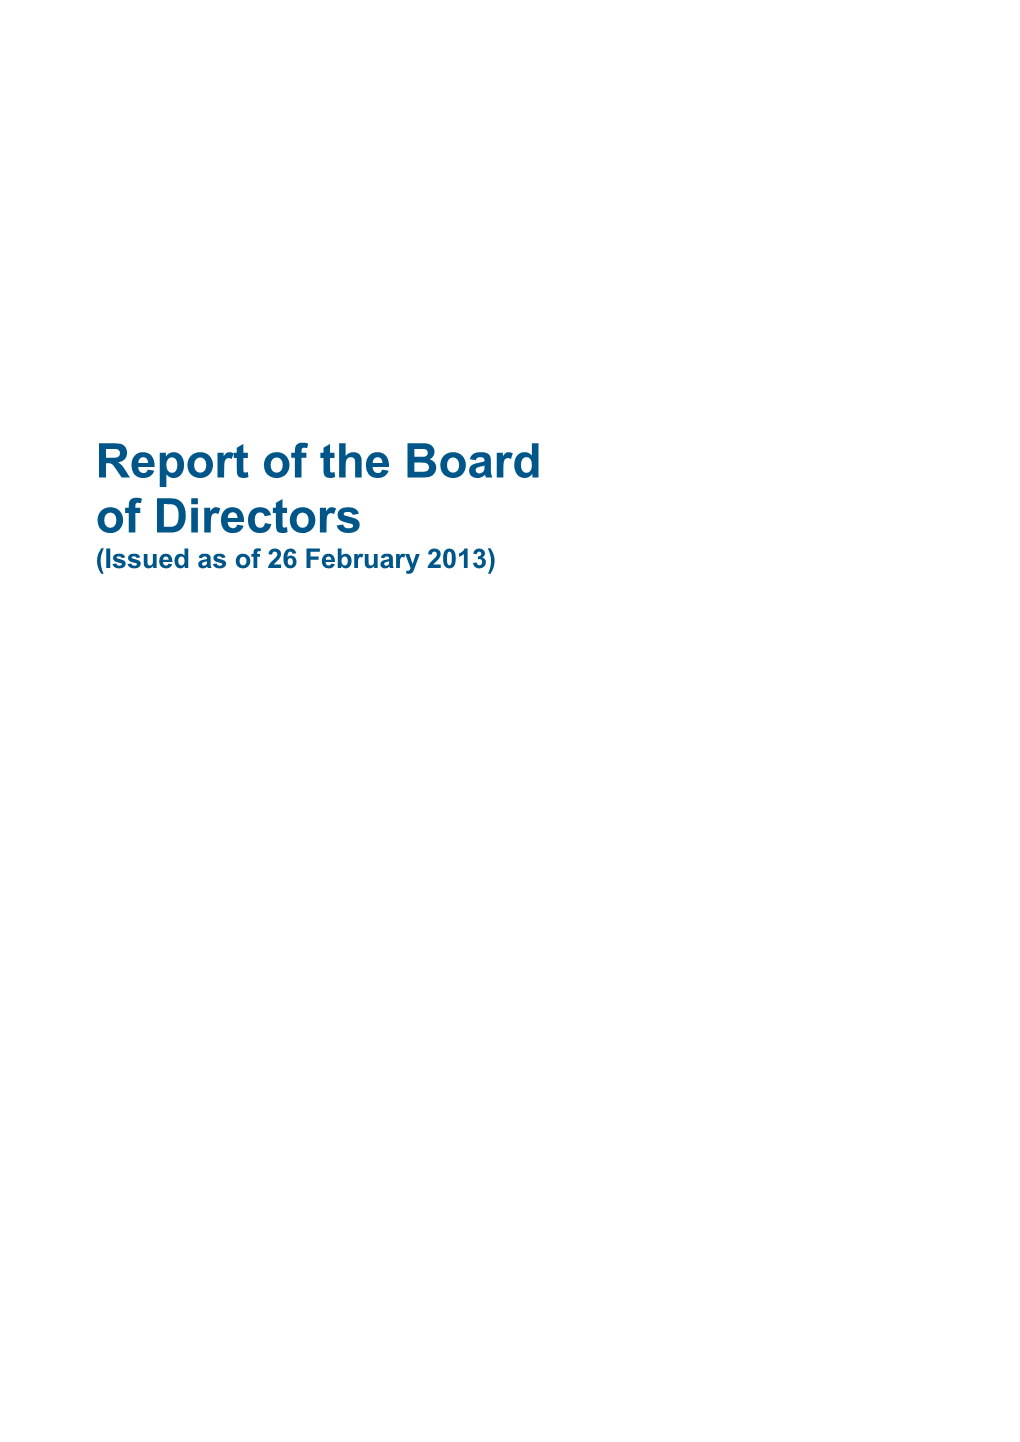 Report of the Board of Directors 2012 0.77 MB